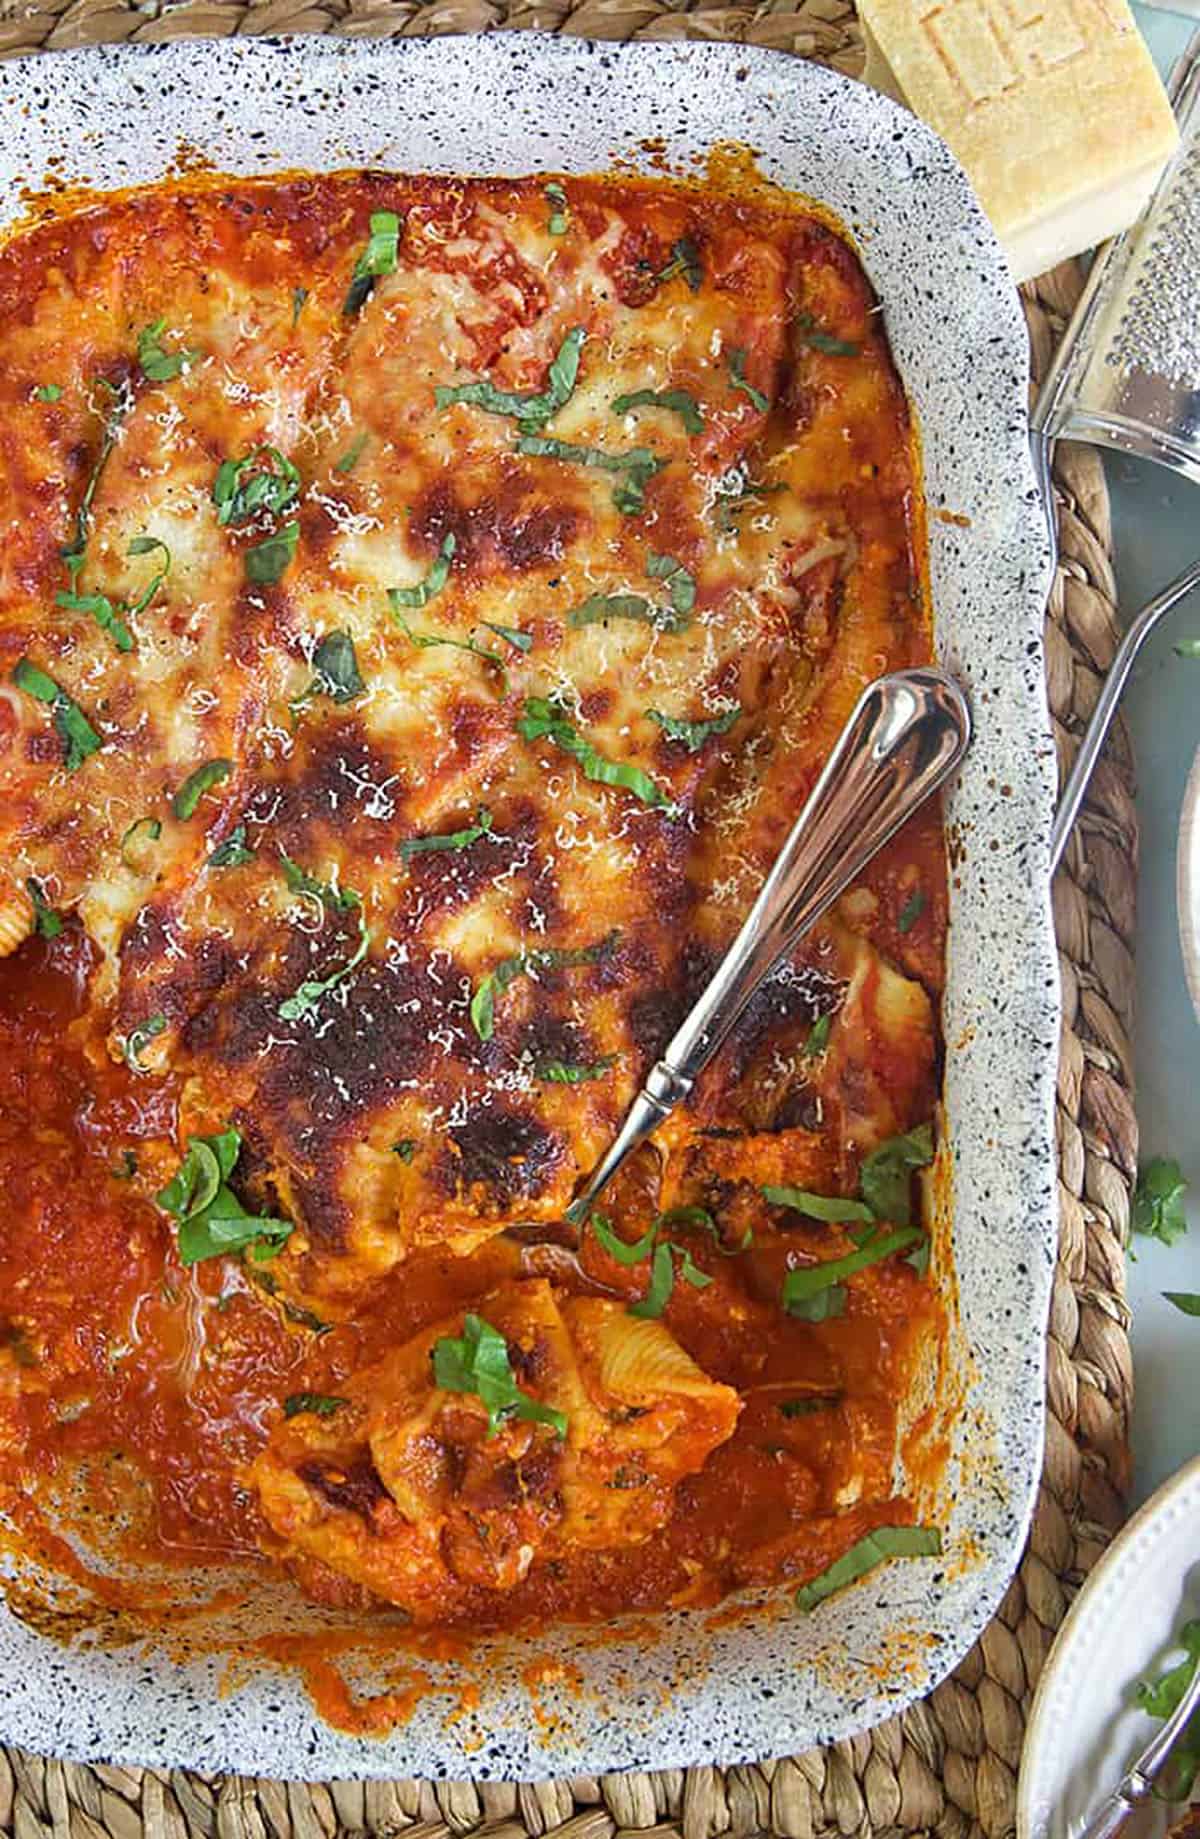 A large baking dish contains a fully baked dinner serving of stuffed shells.